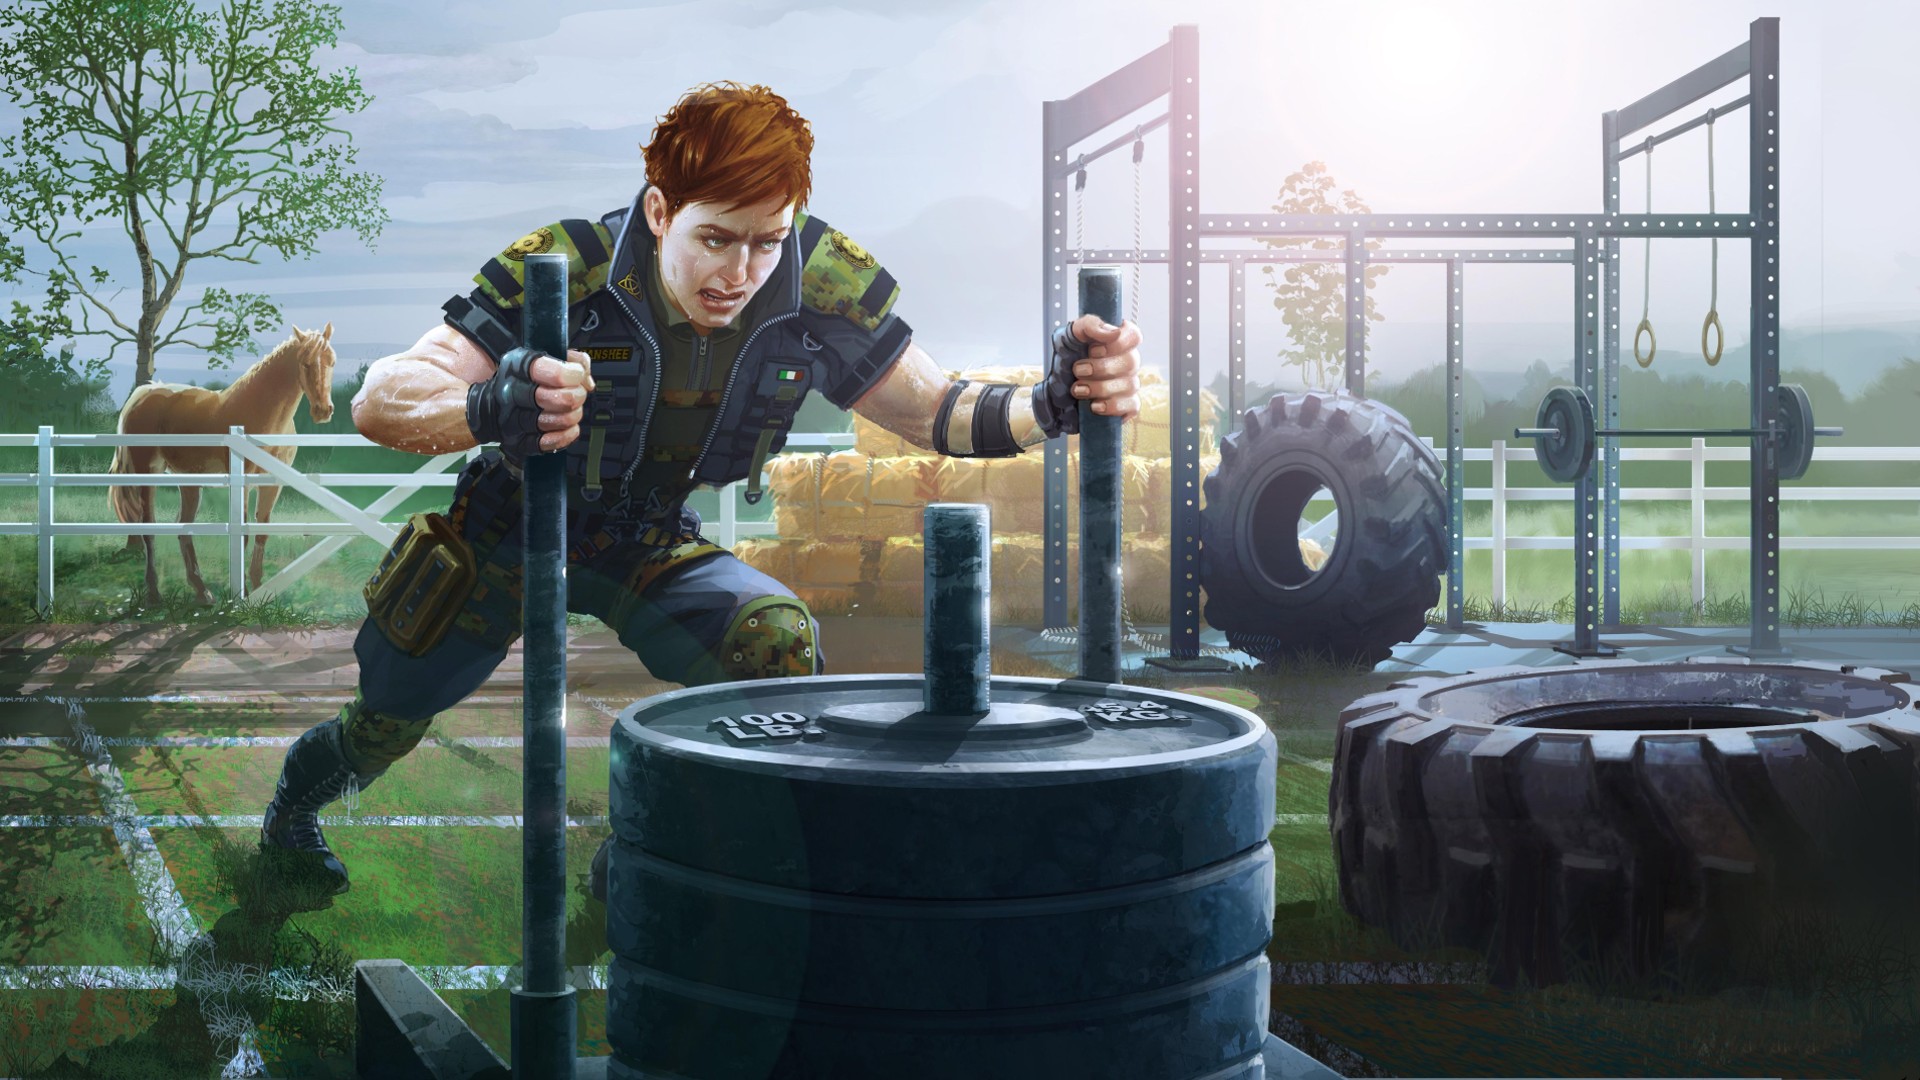 Rainbow Six Siege High Calibre: Thorn gets a workout in, pushing a load of weights across the ground